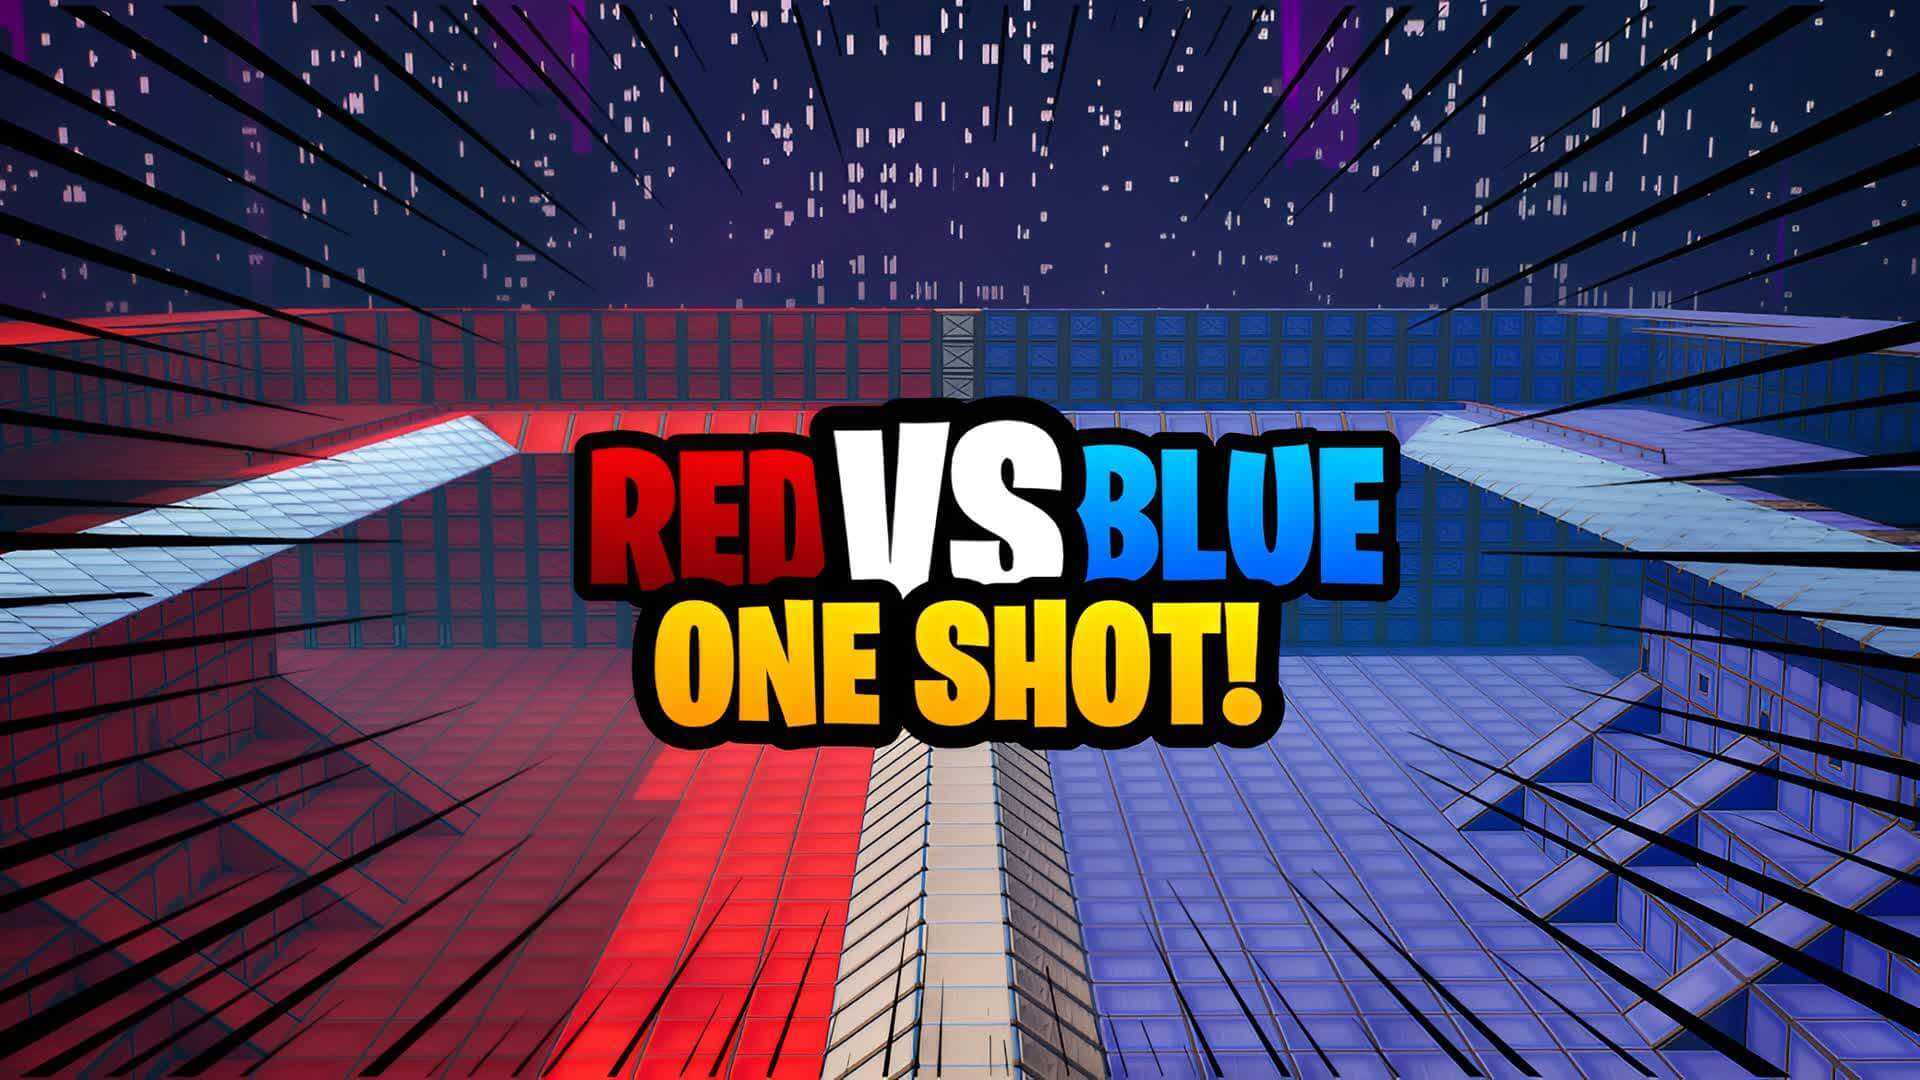 INSANE RED VS BLUE: ONE SHOT LOW GRAVITY